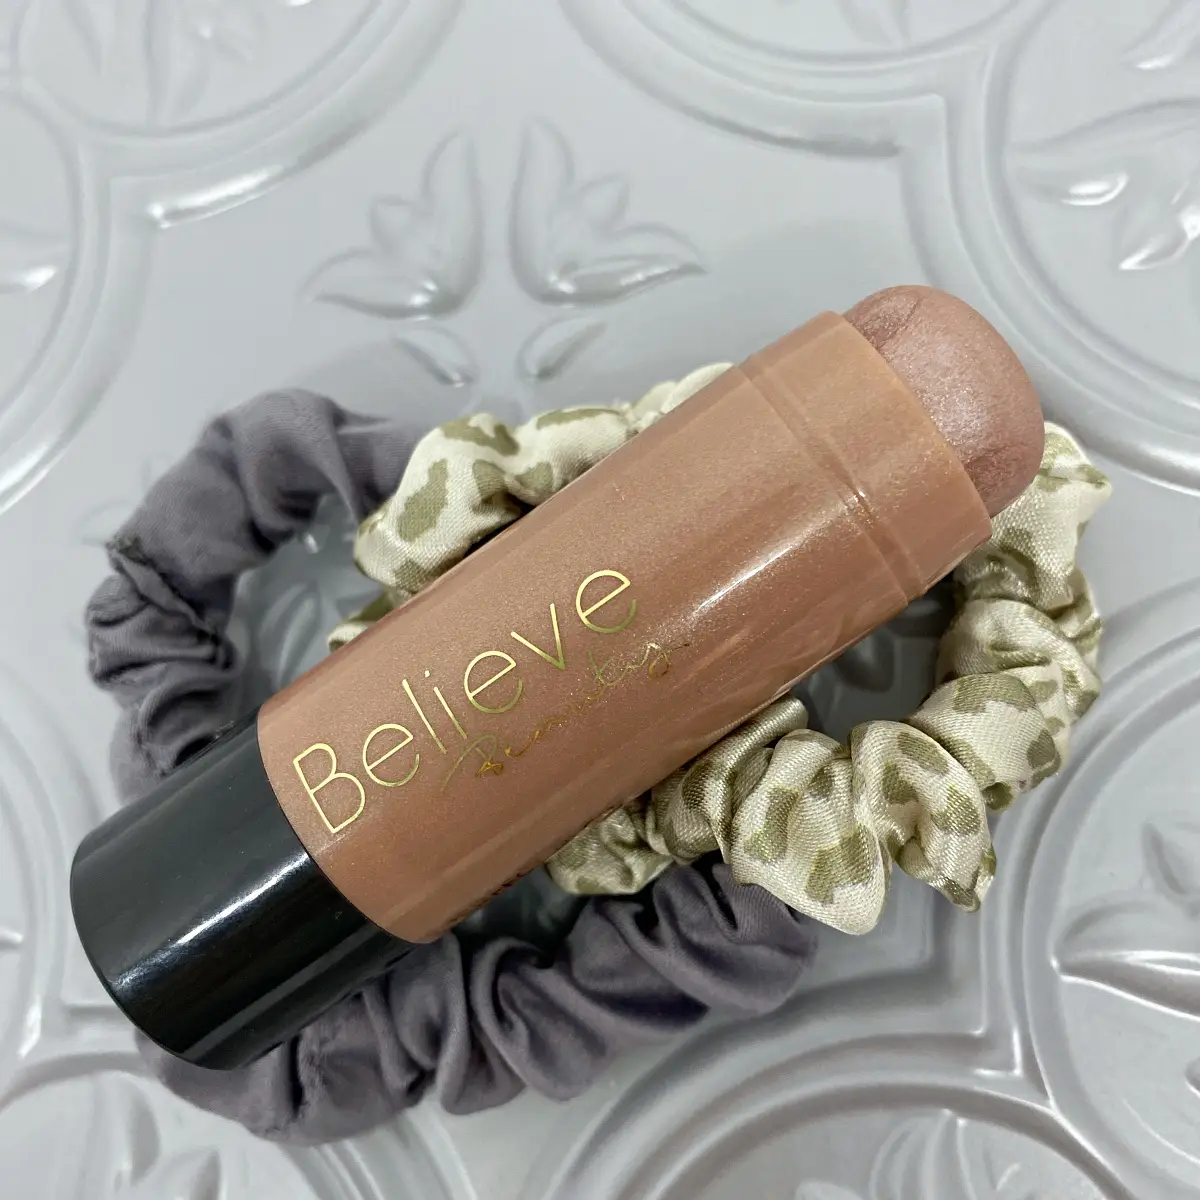 believe beauty Perfect Glow Highlighting Stick in Pixie